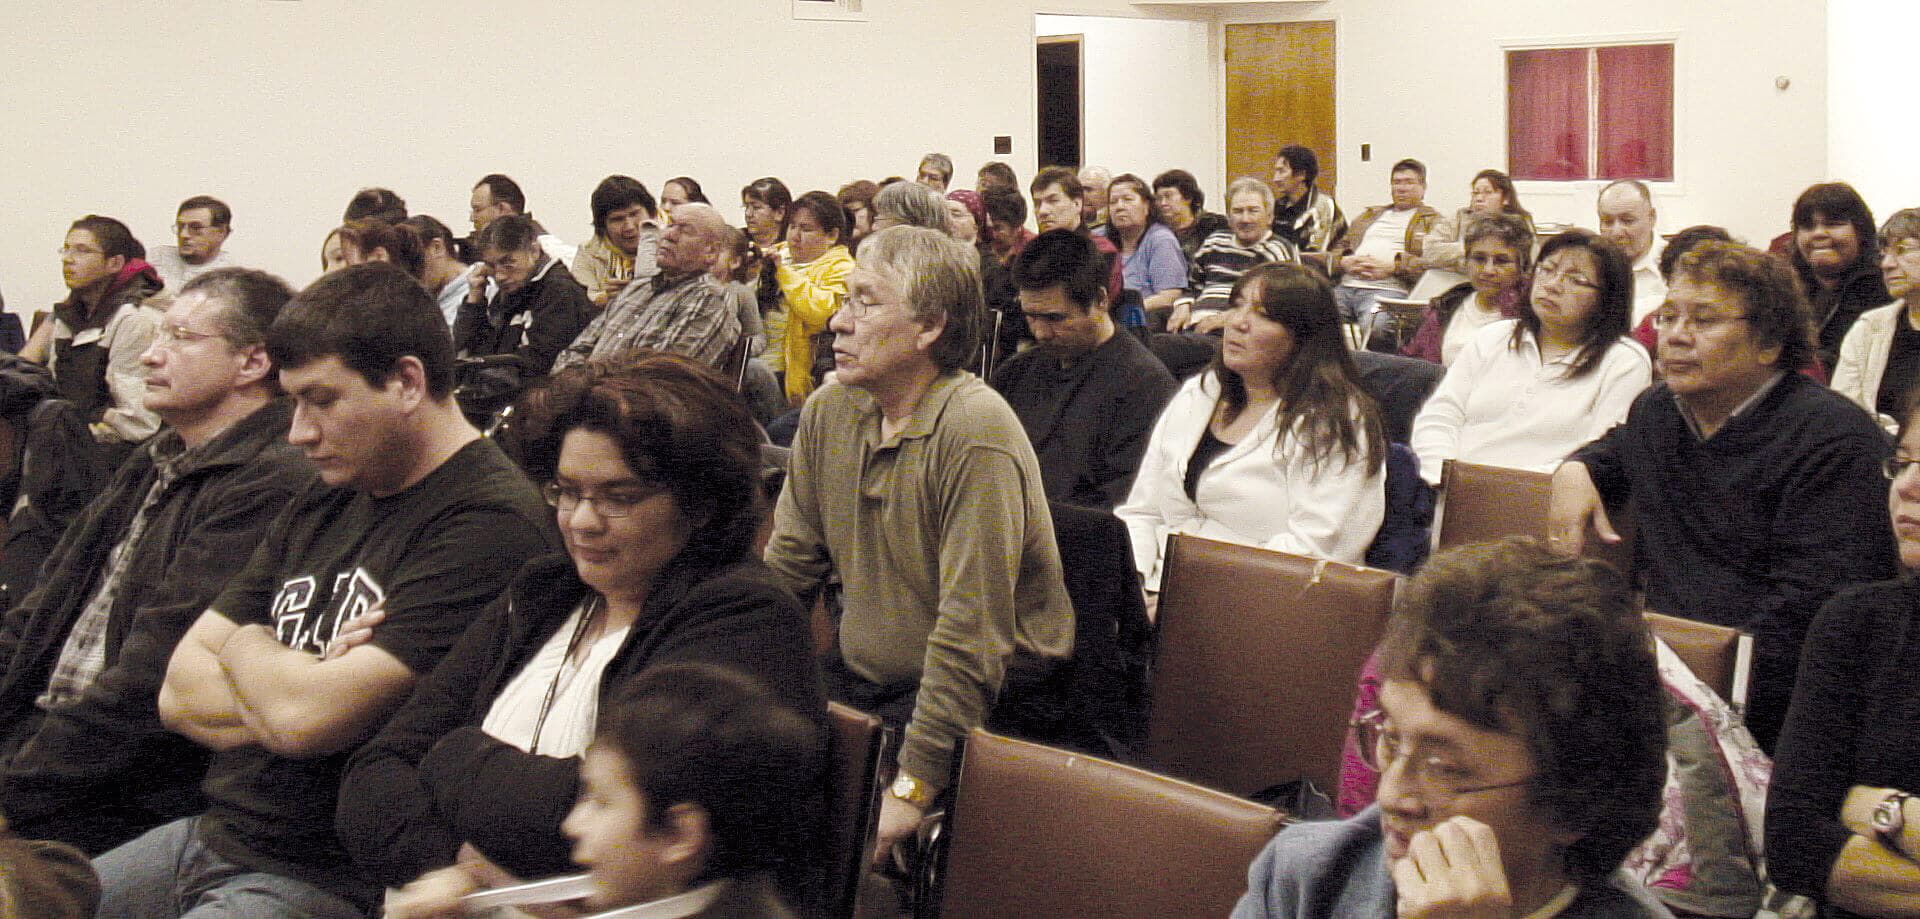 Photo of church attendees